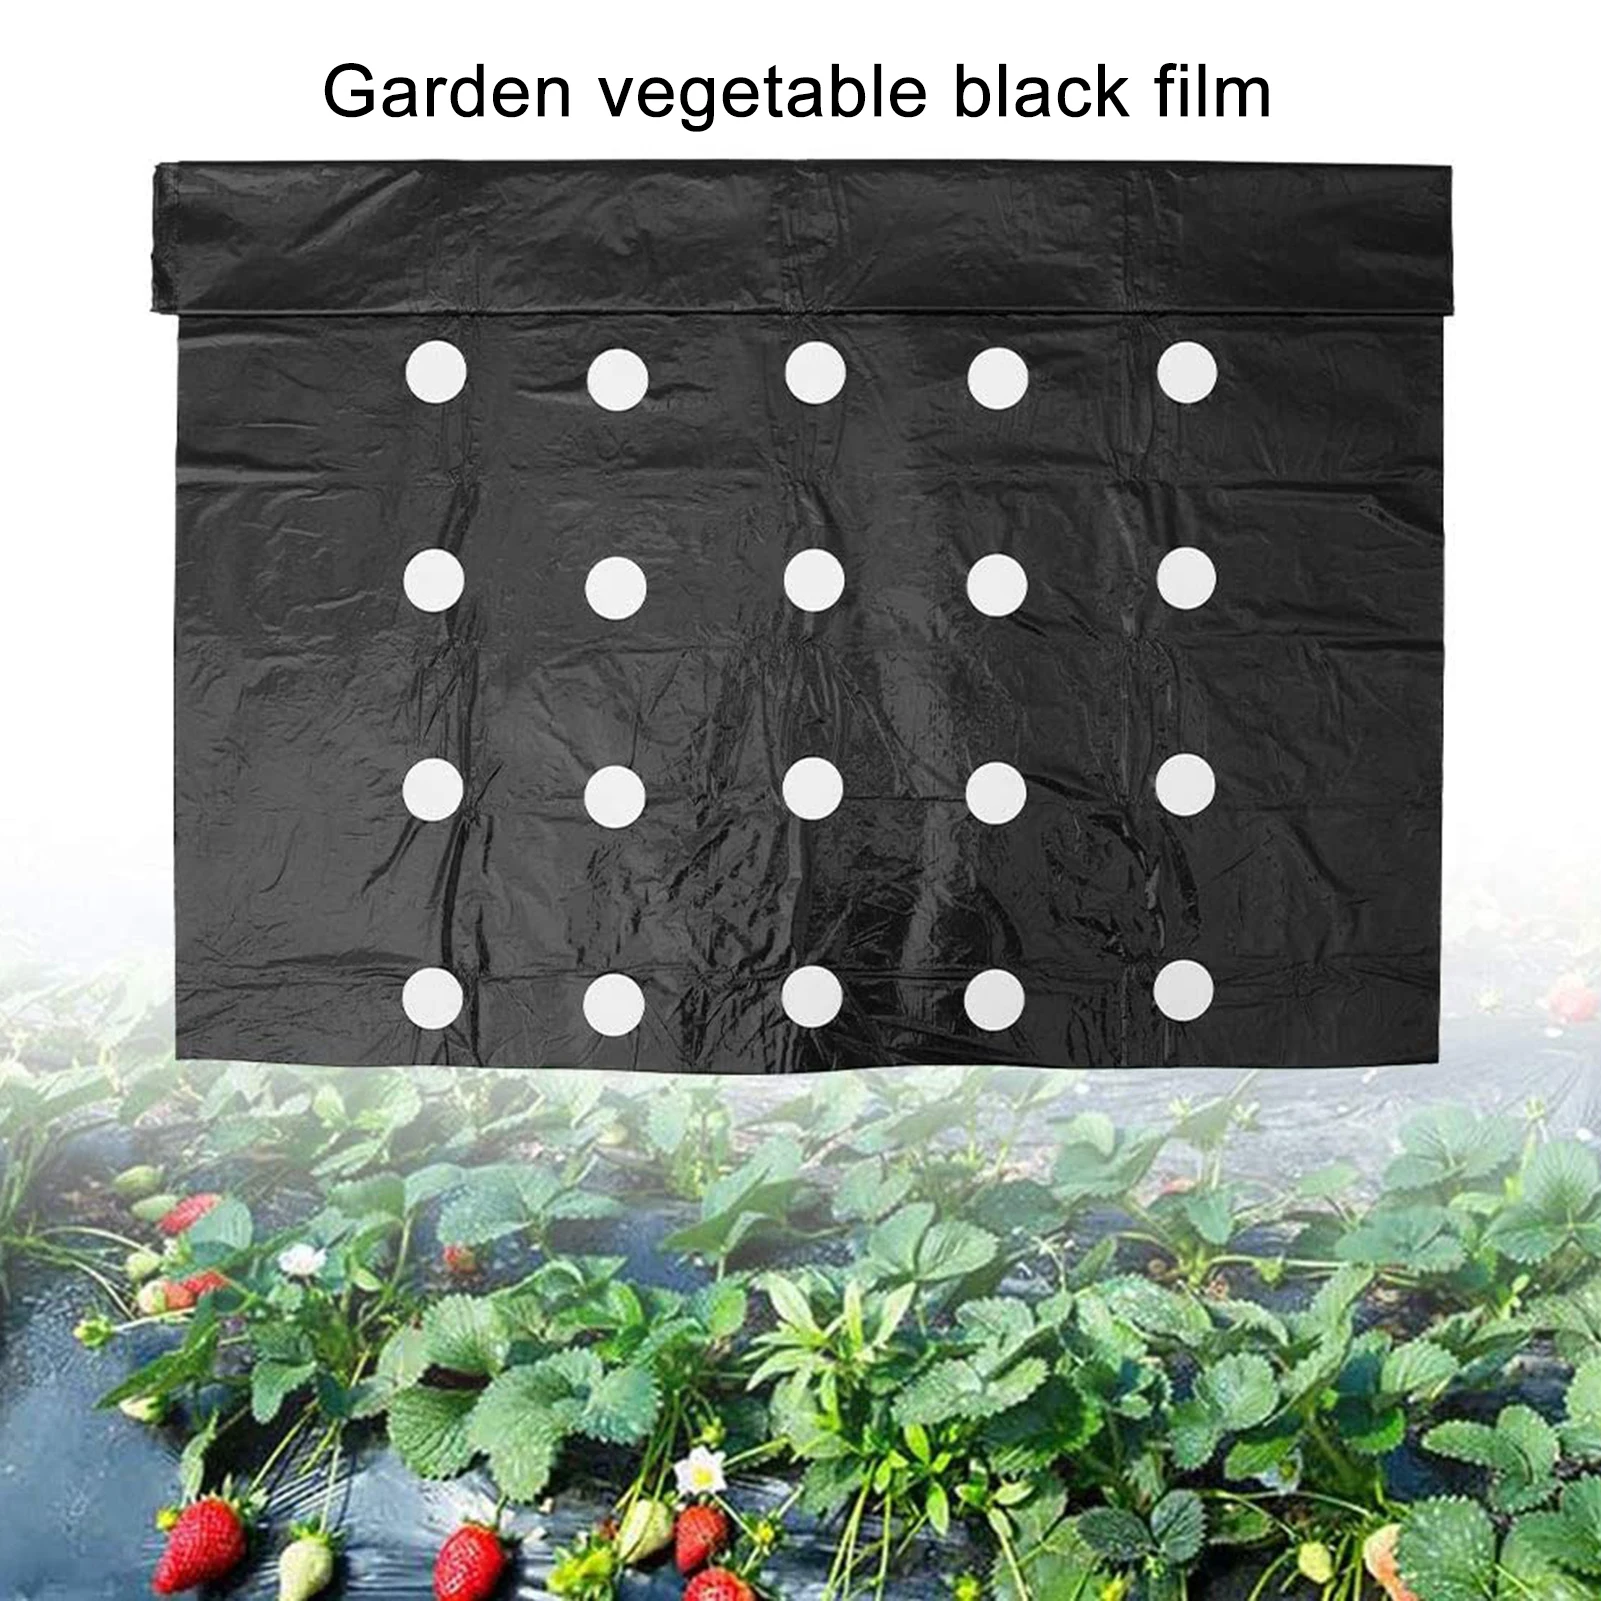 20Holes Garden Film Weed Control Film Hi-Quality Vegetable Plants Grow Film Protection Cover Greenhouse Perforated PE Mulch Film